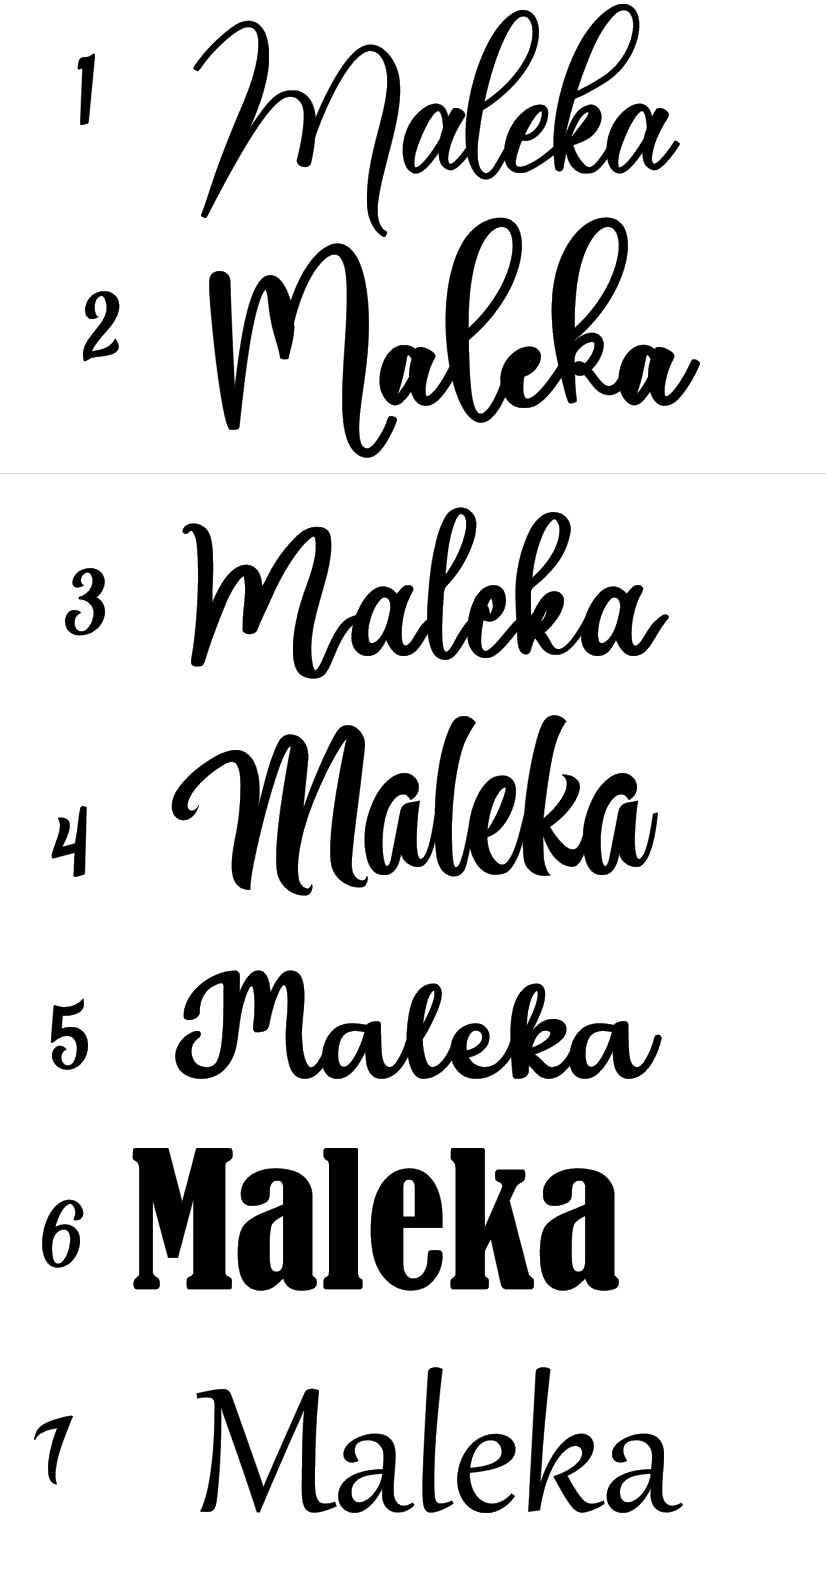 Font selection for acrylic signs